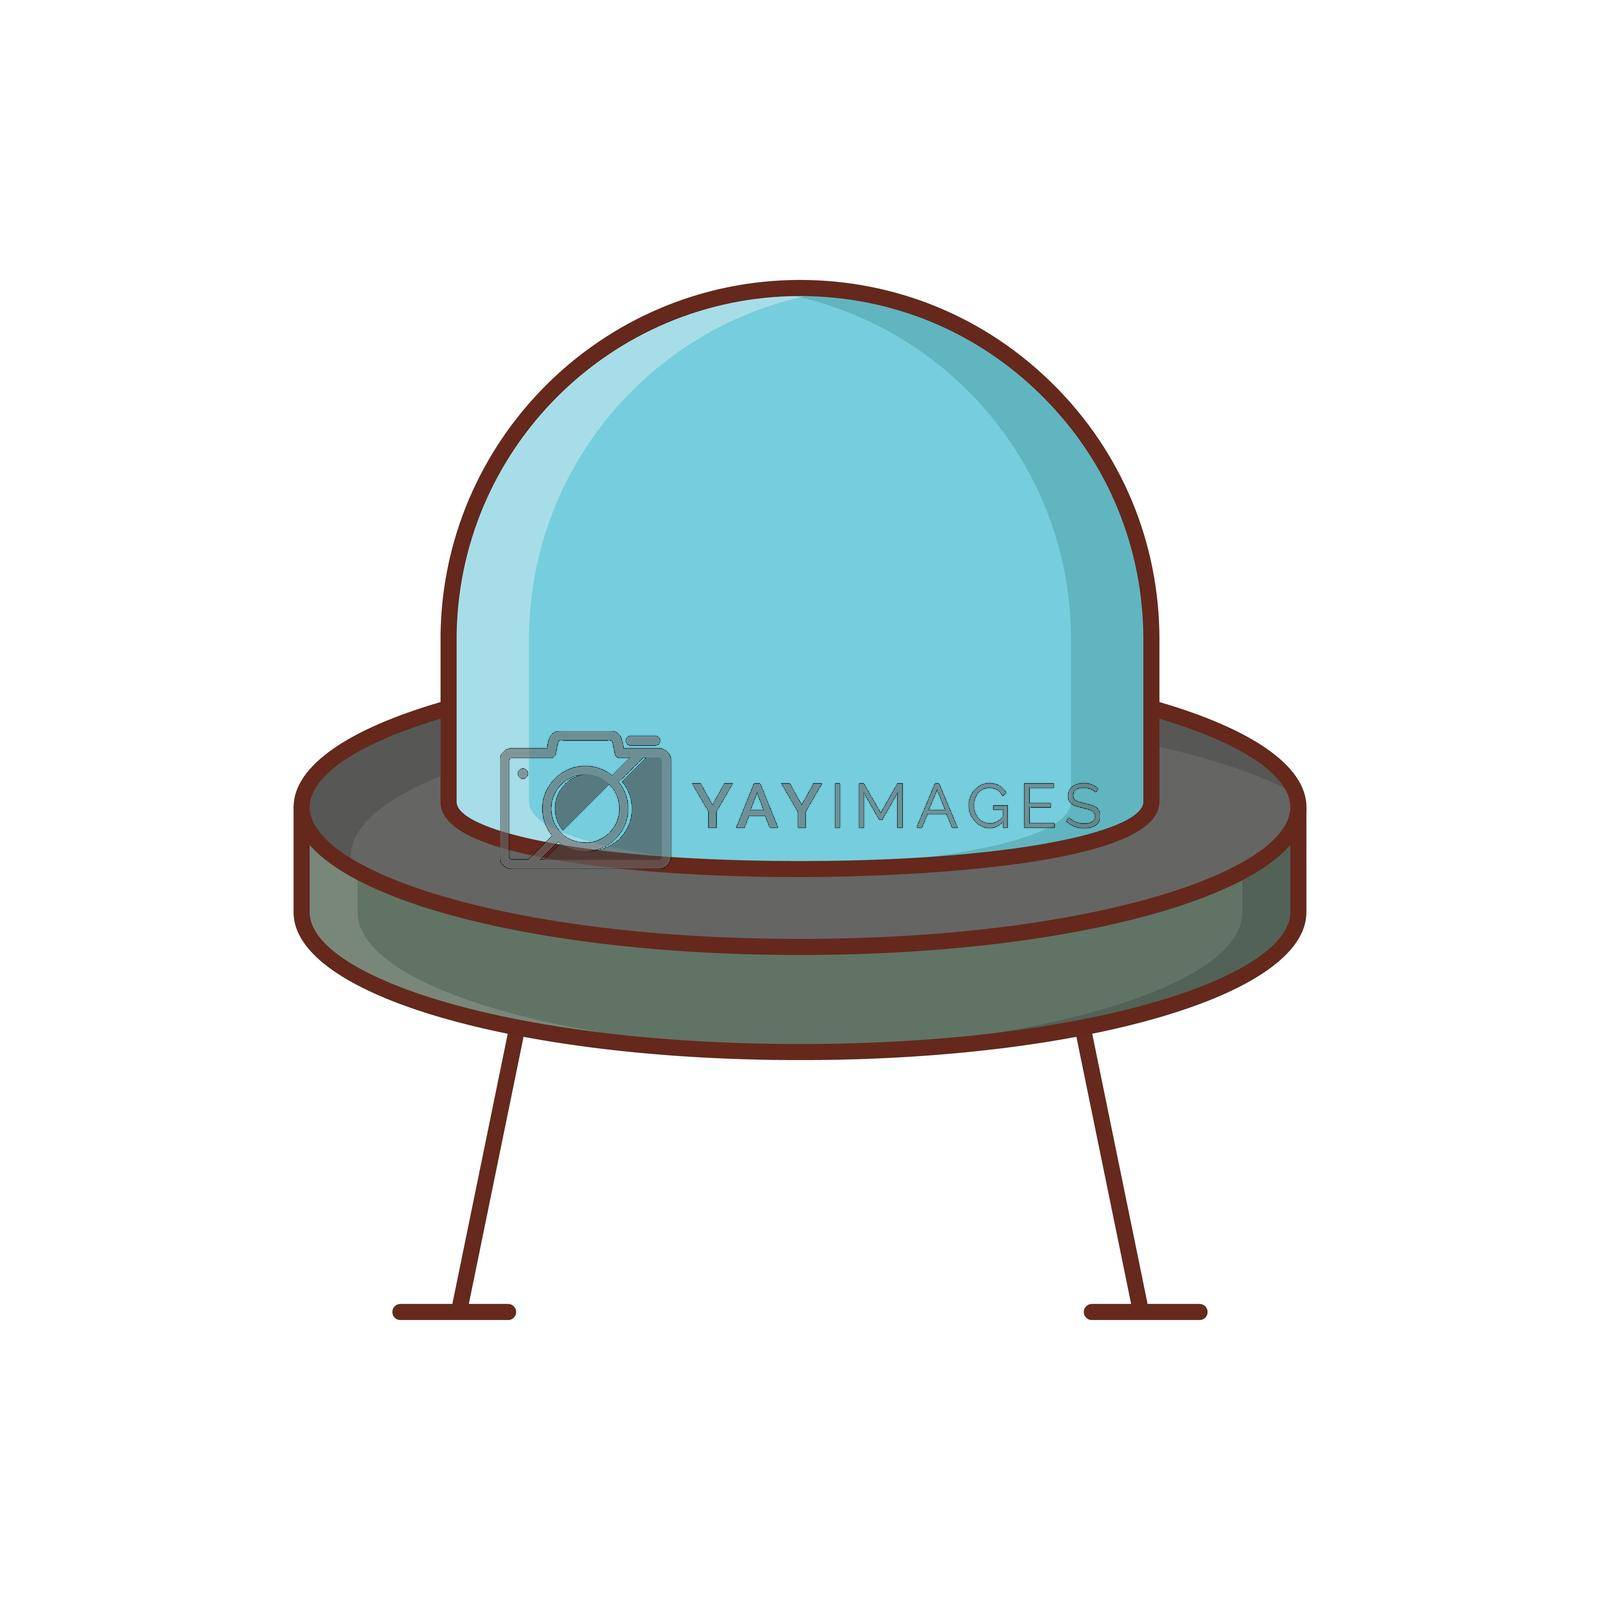 Royalty free image of spaceship by FlaticonsDesign